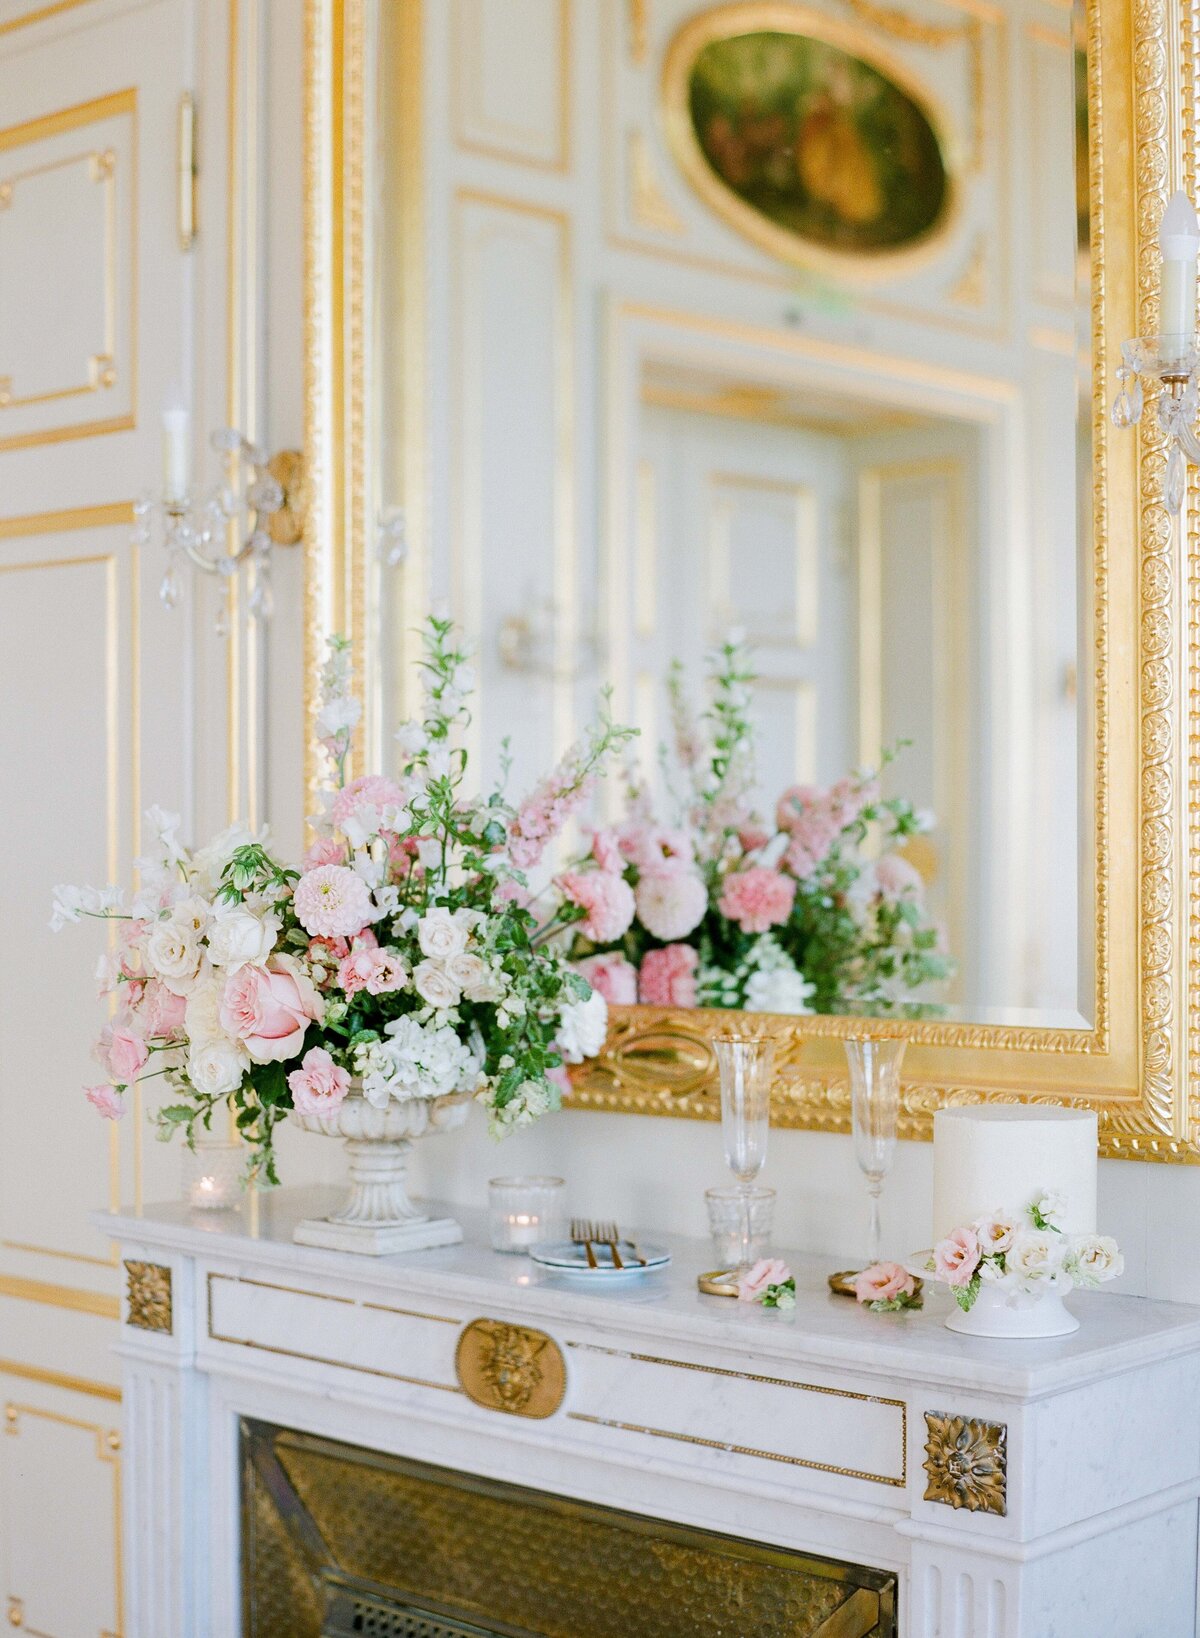 Jennifer Fox Weddings English speaking wedding planning & design agency in France crafting refined and bespoke weddings and celebrations Provence, Paris and destination Alyssa-Aaron-Molly-Carr-Photography-64